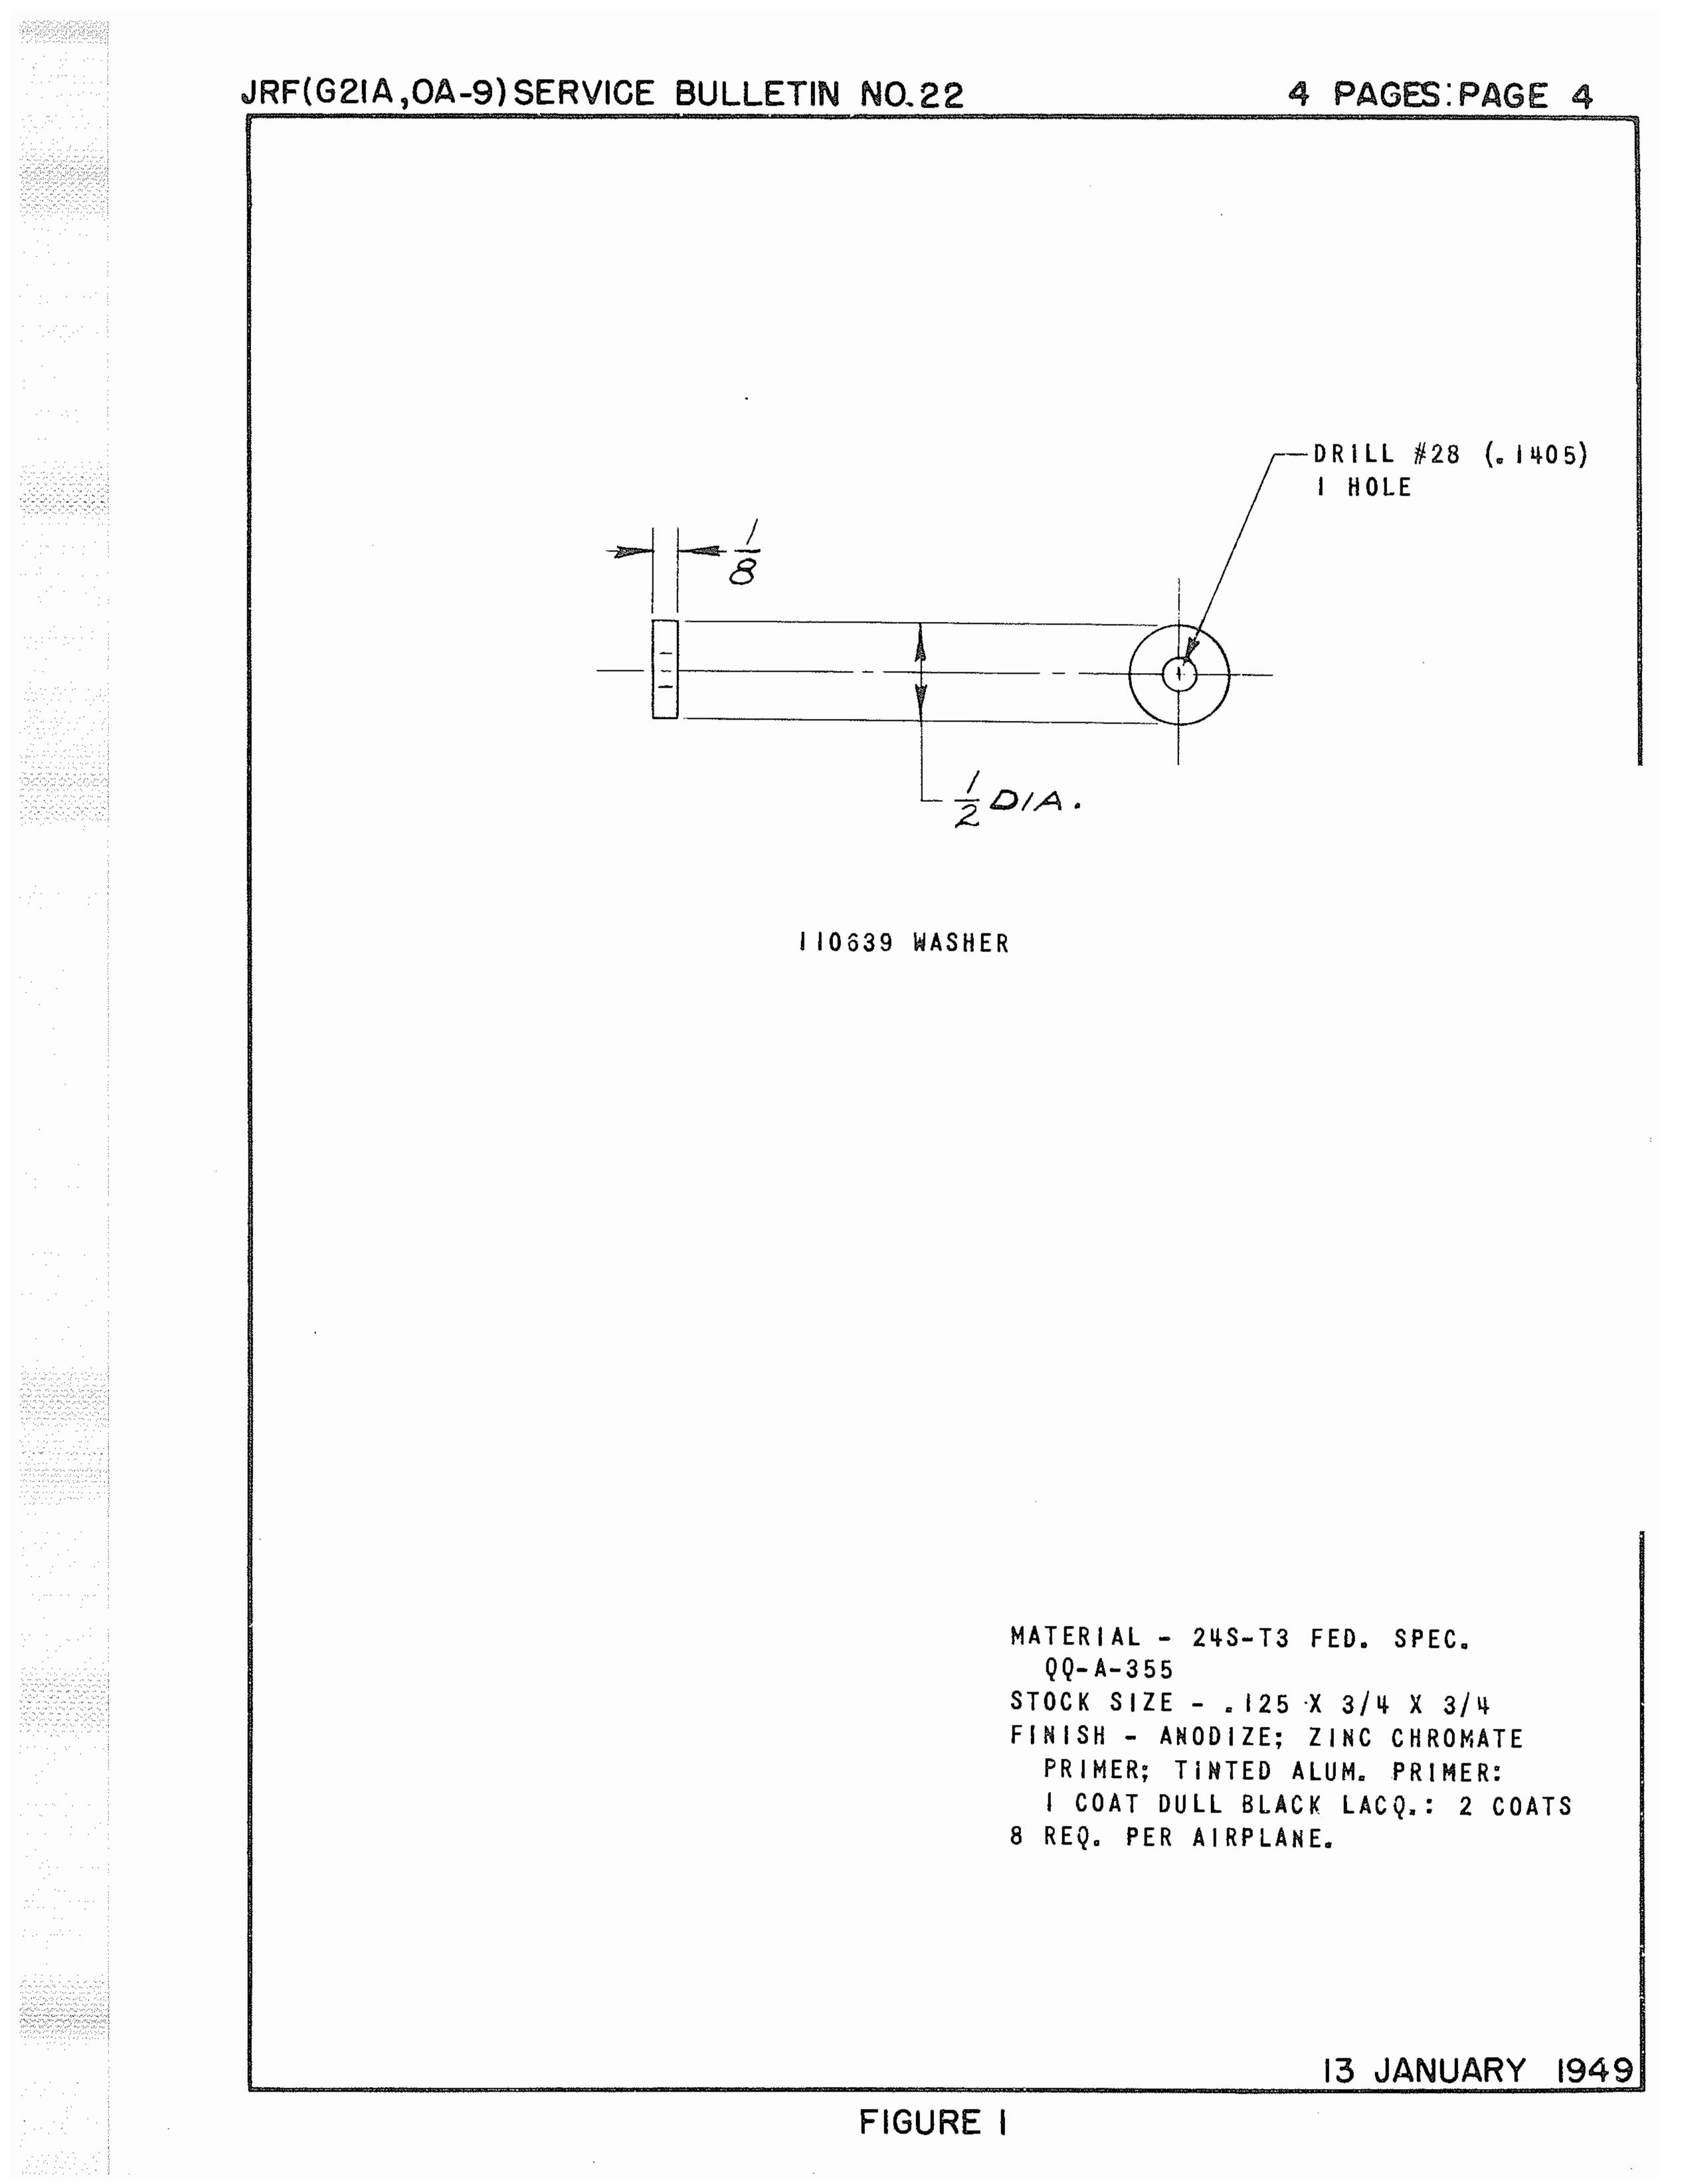 Sample page 6 from AirCorps Library document: Removal of Furnishings, Cover, Gyro Horizon Indicator and Directional Gyro Air Filter Body for JRF Aircraft